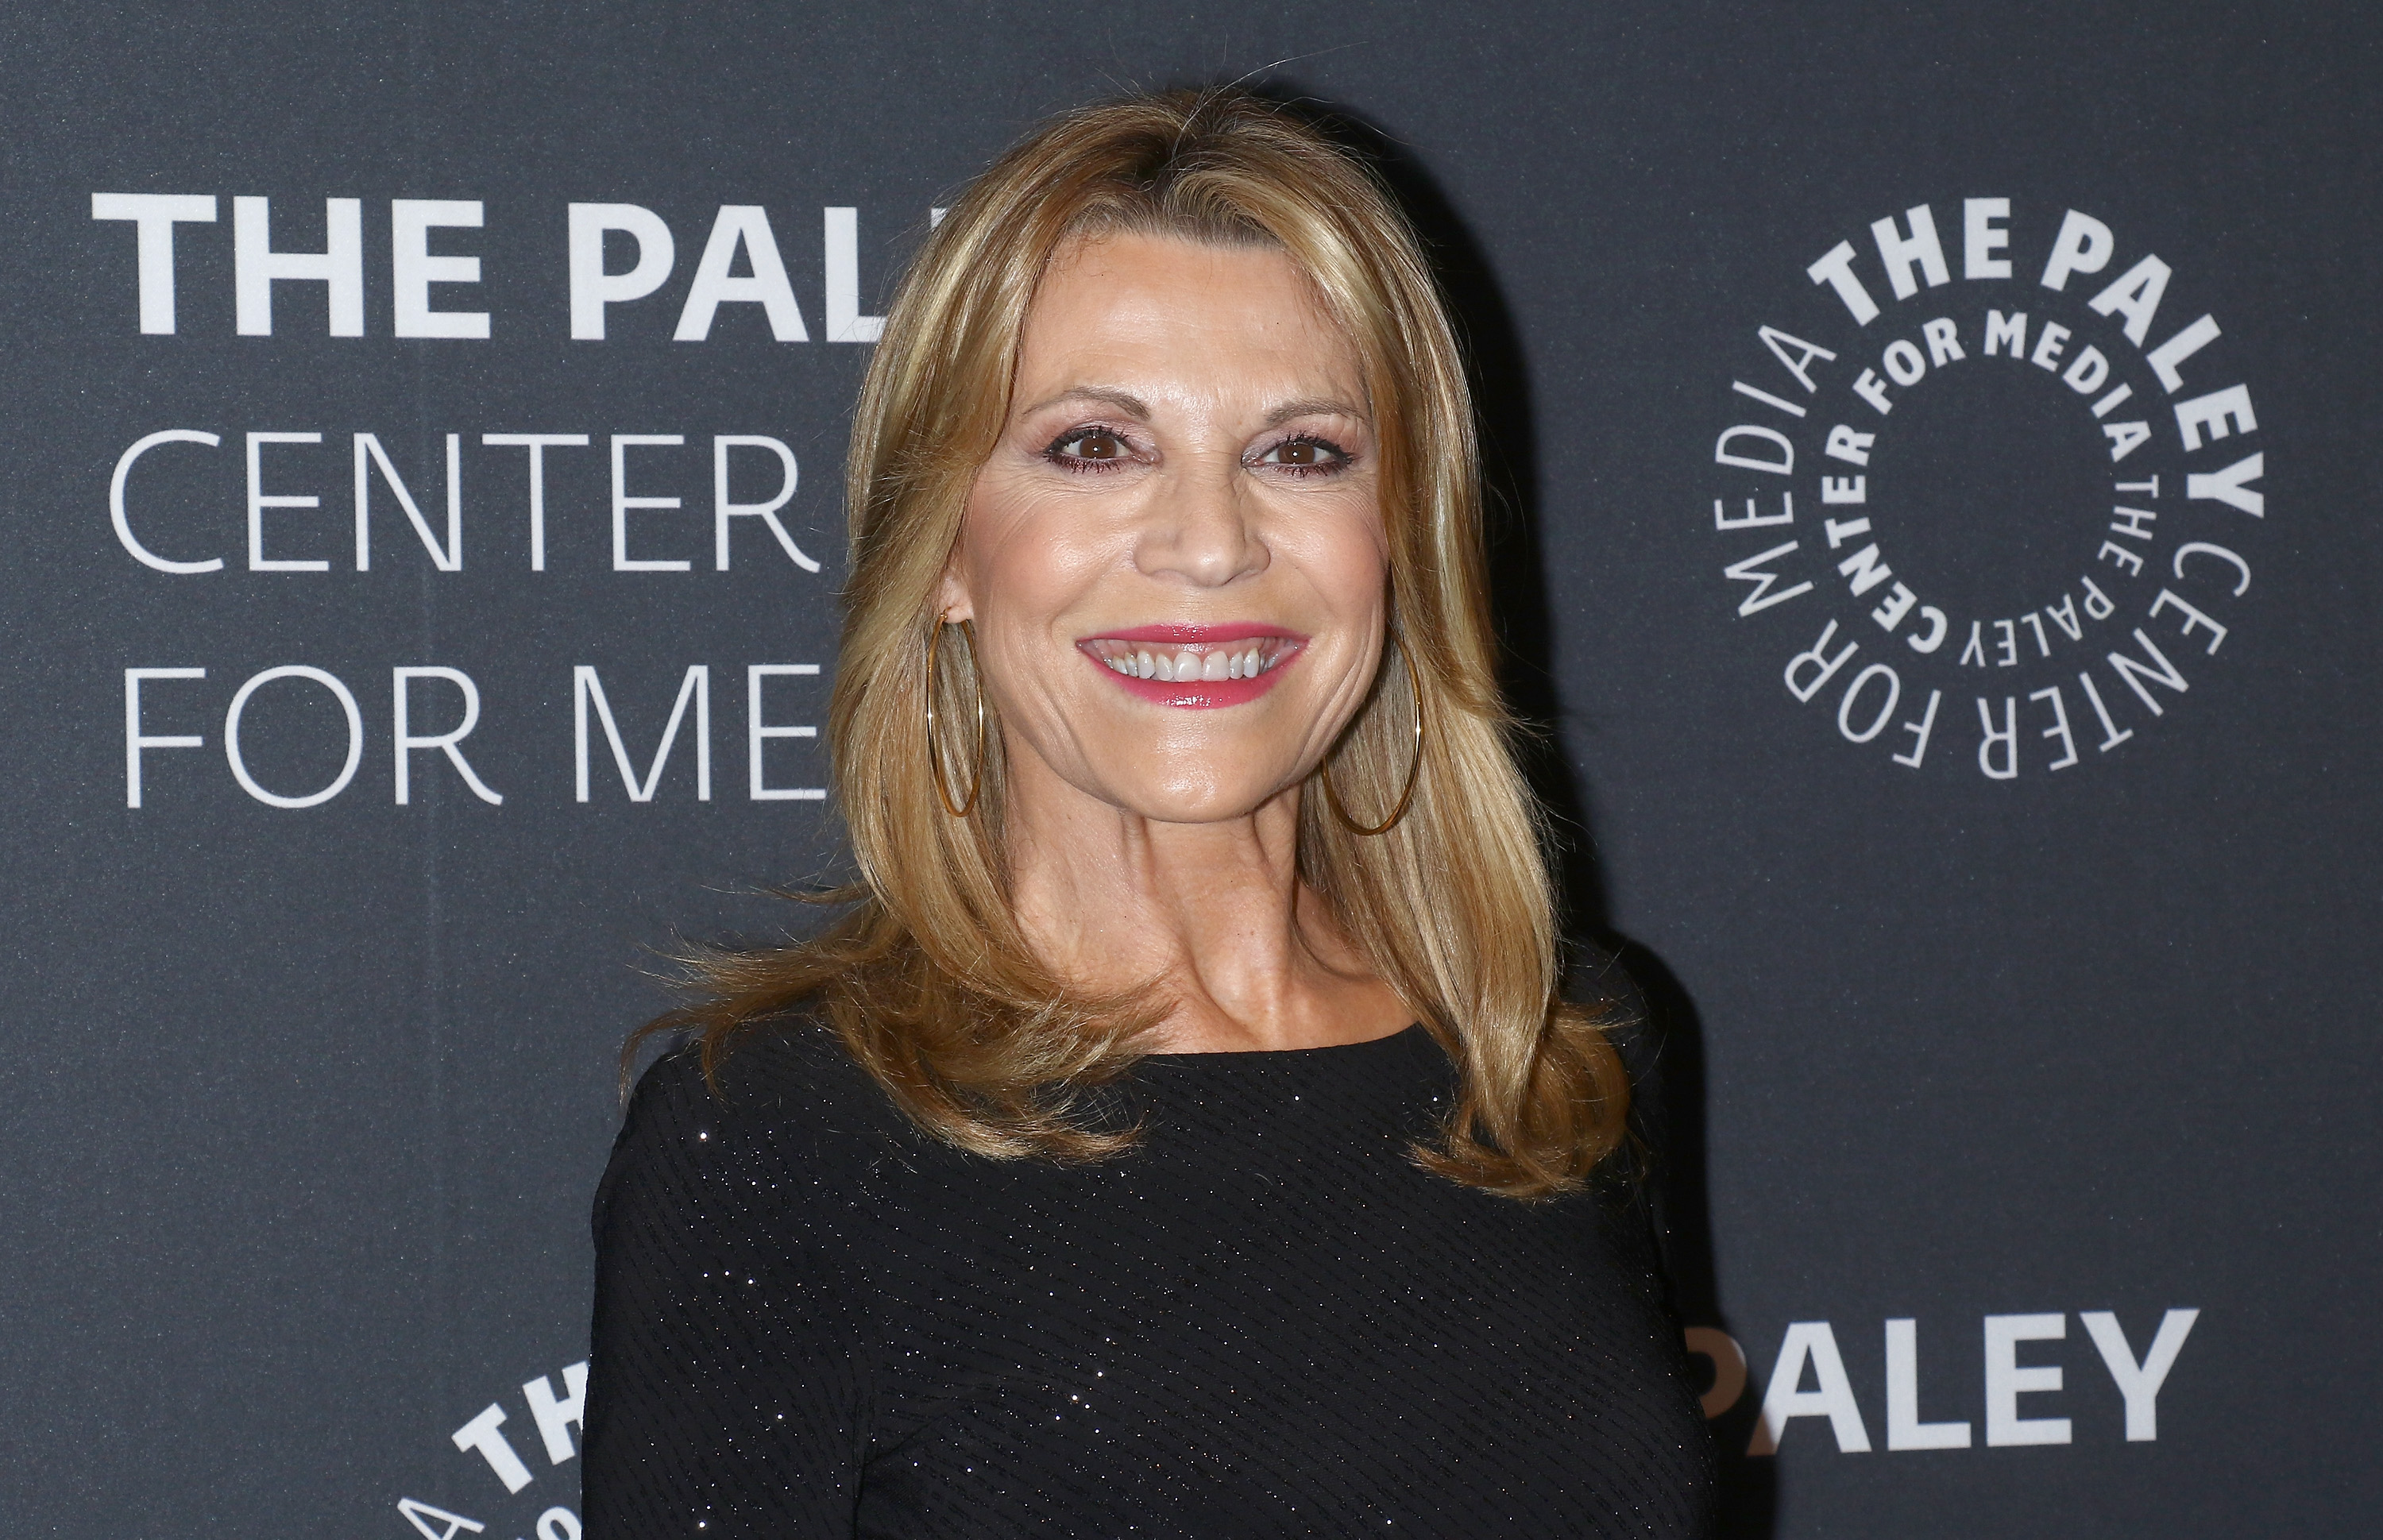 Vanna White attends The Wheel of Fortune: 35 Years as America's Game at The Paley Center for Media on November 15, 2017 in New York City  | Source: Getty Images